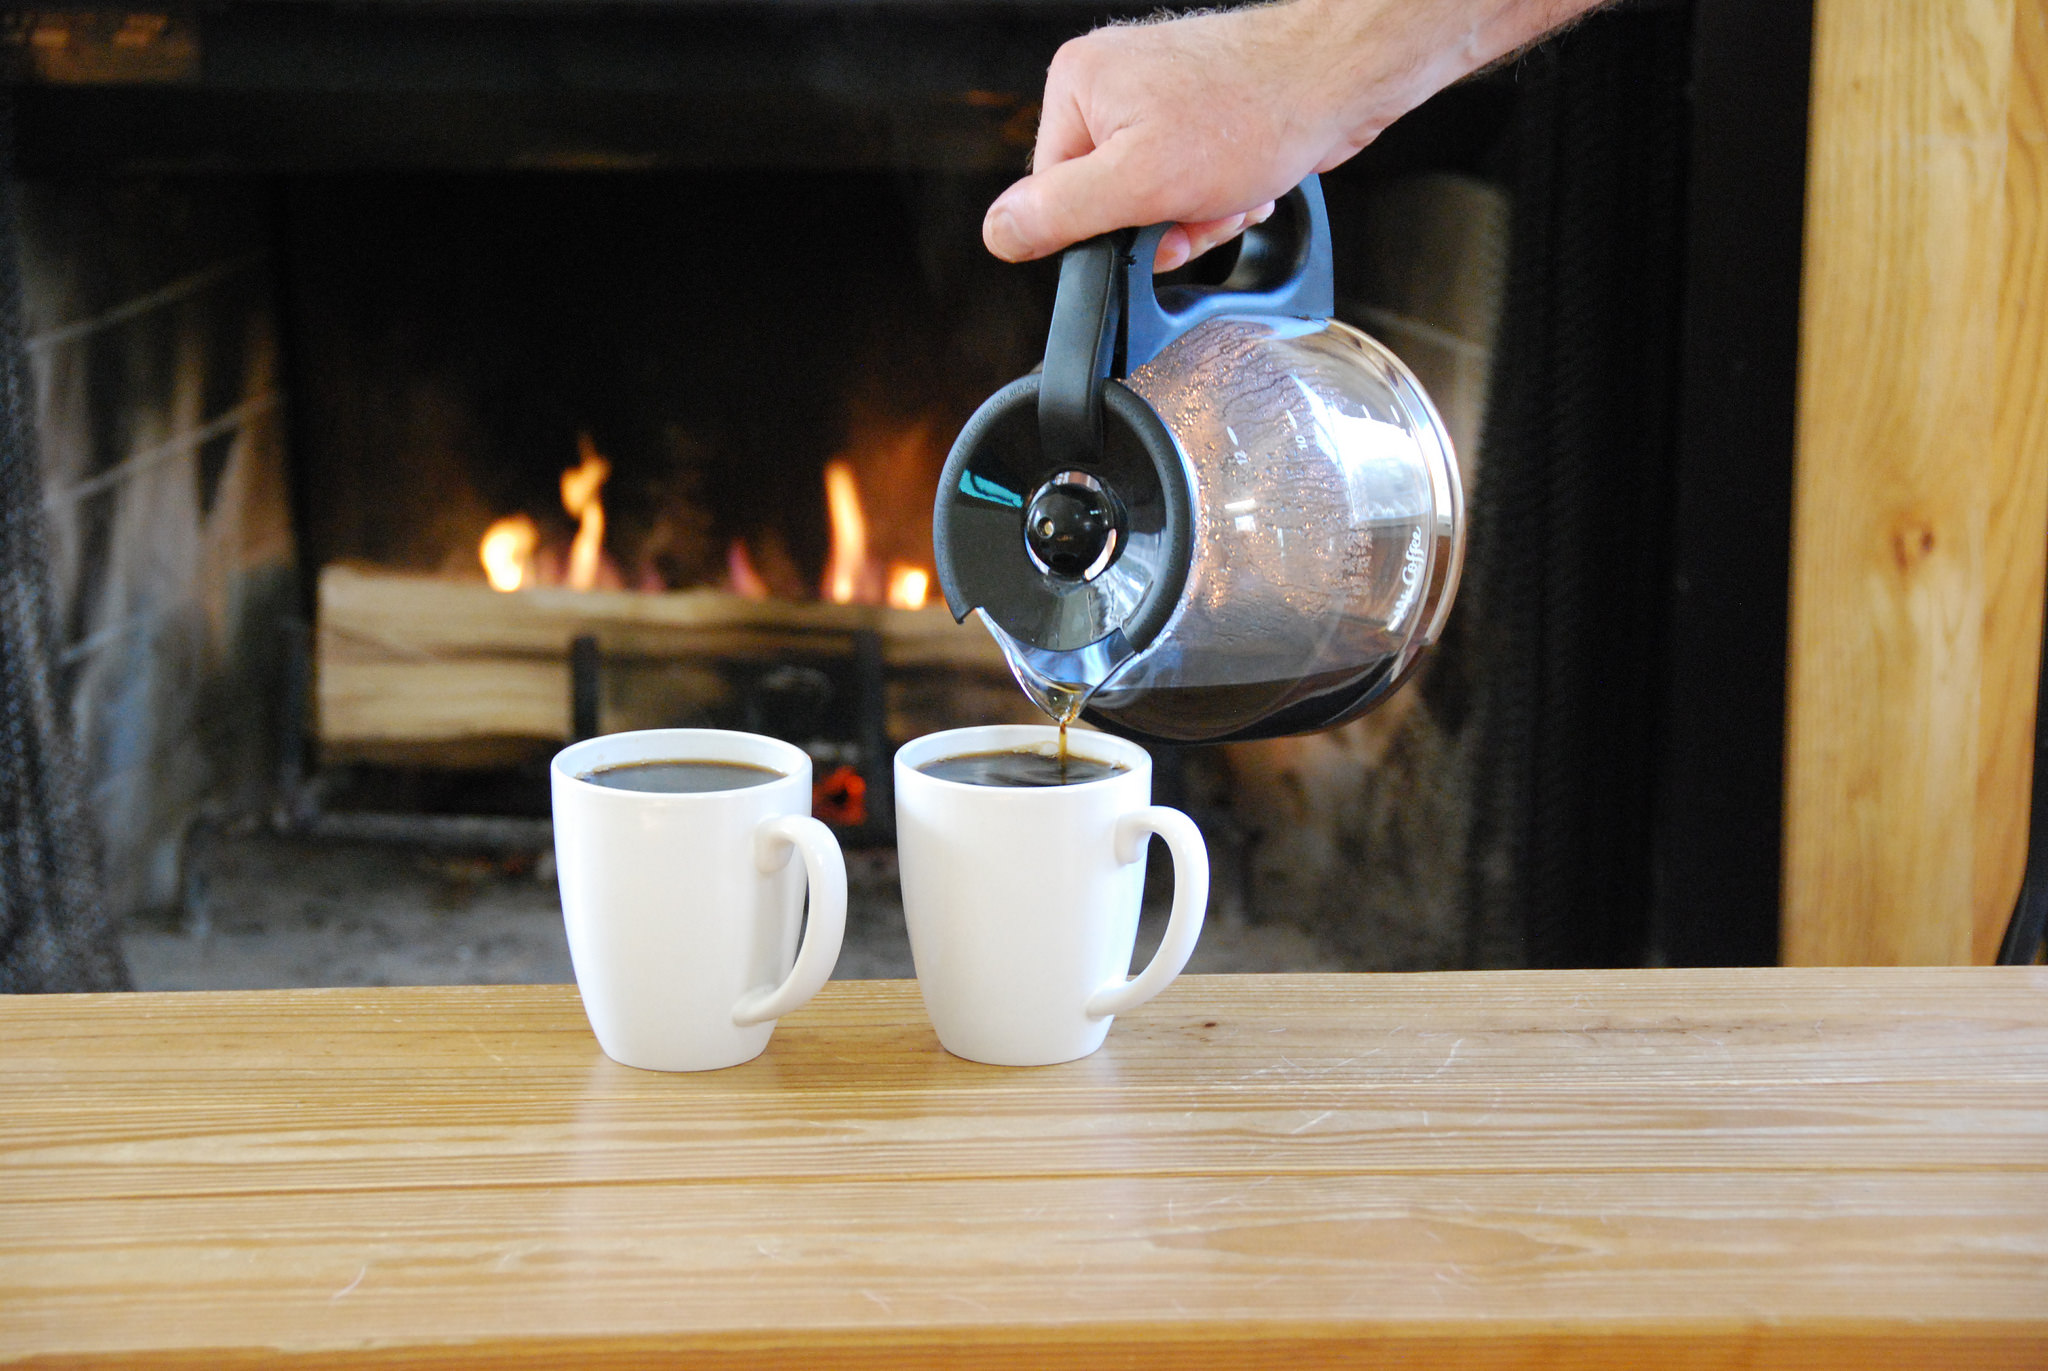 two cups of coffee being filled in front of a fireplace